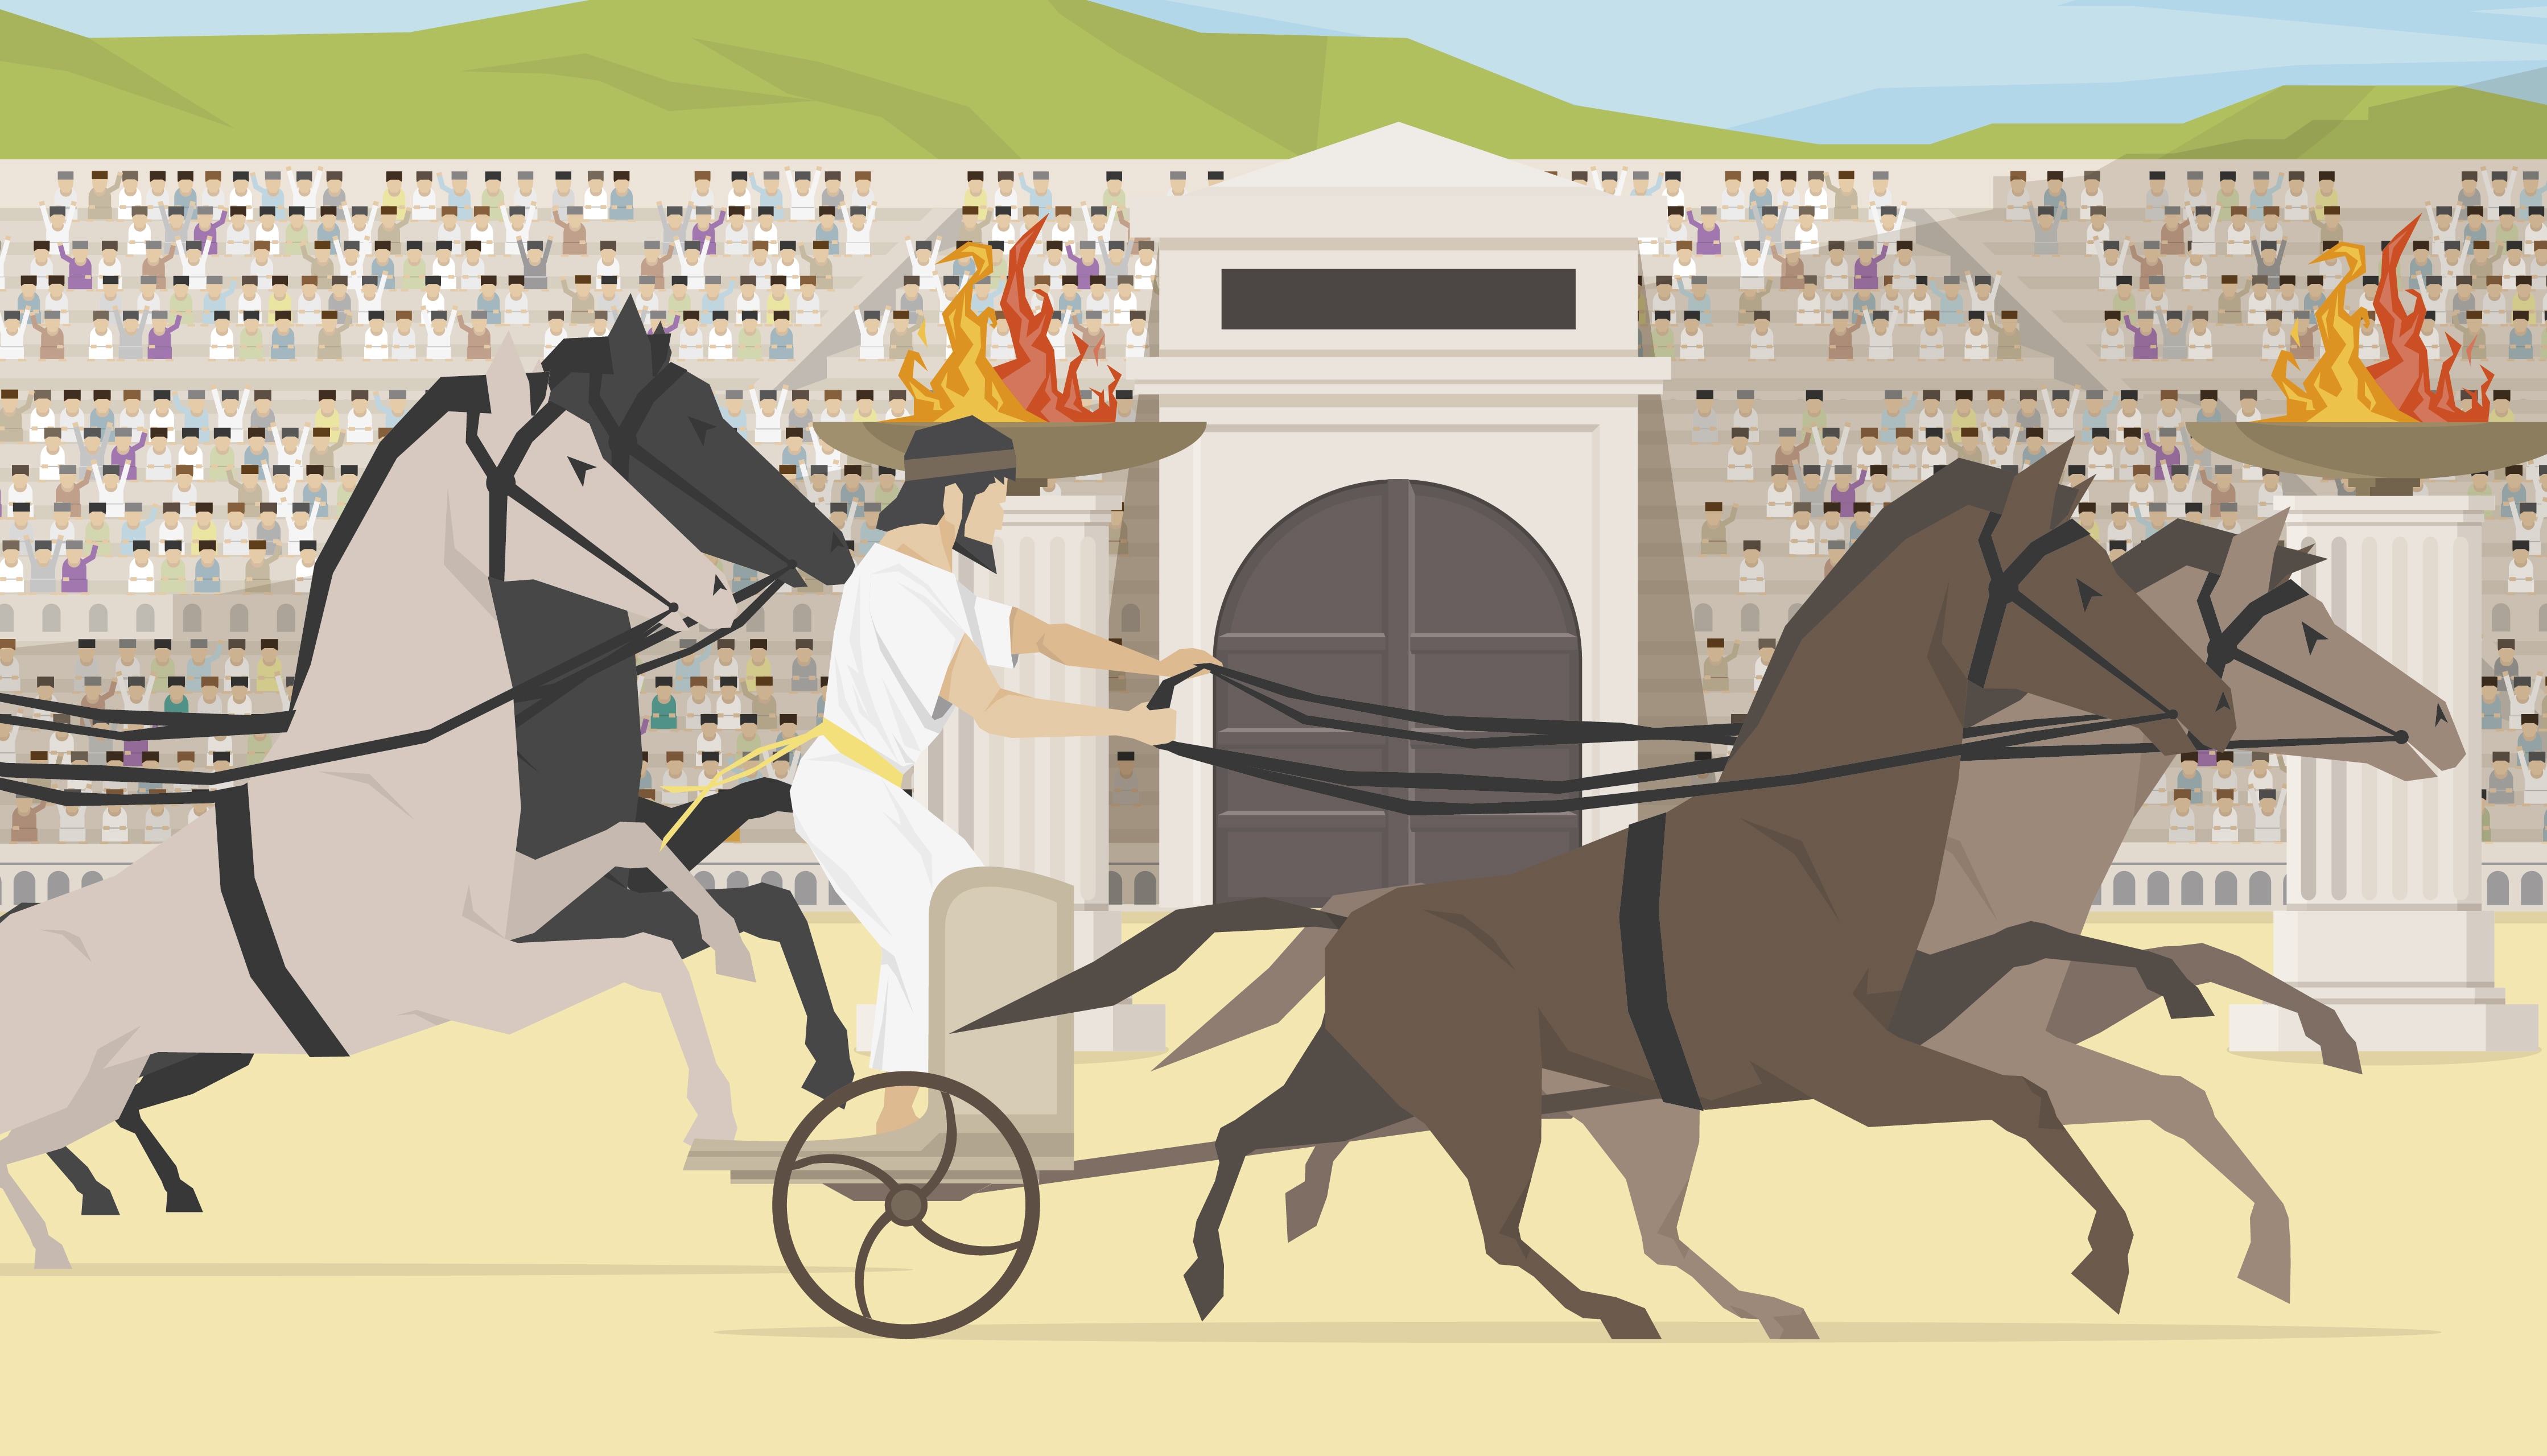 roman chariots for kids